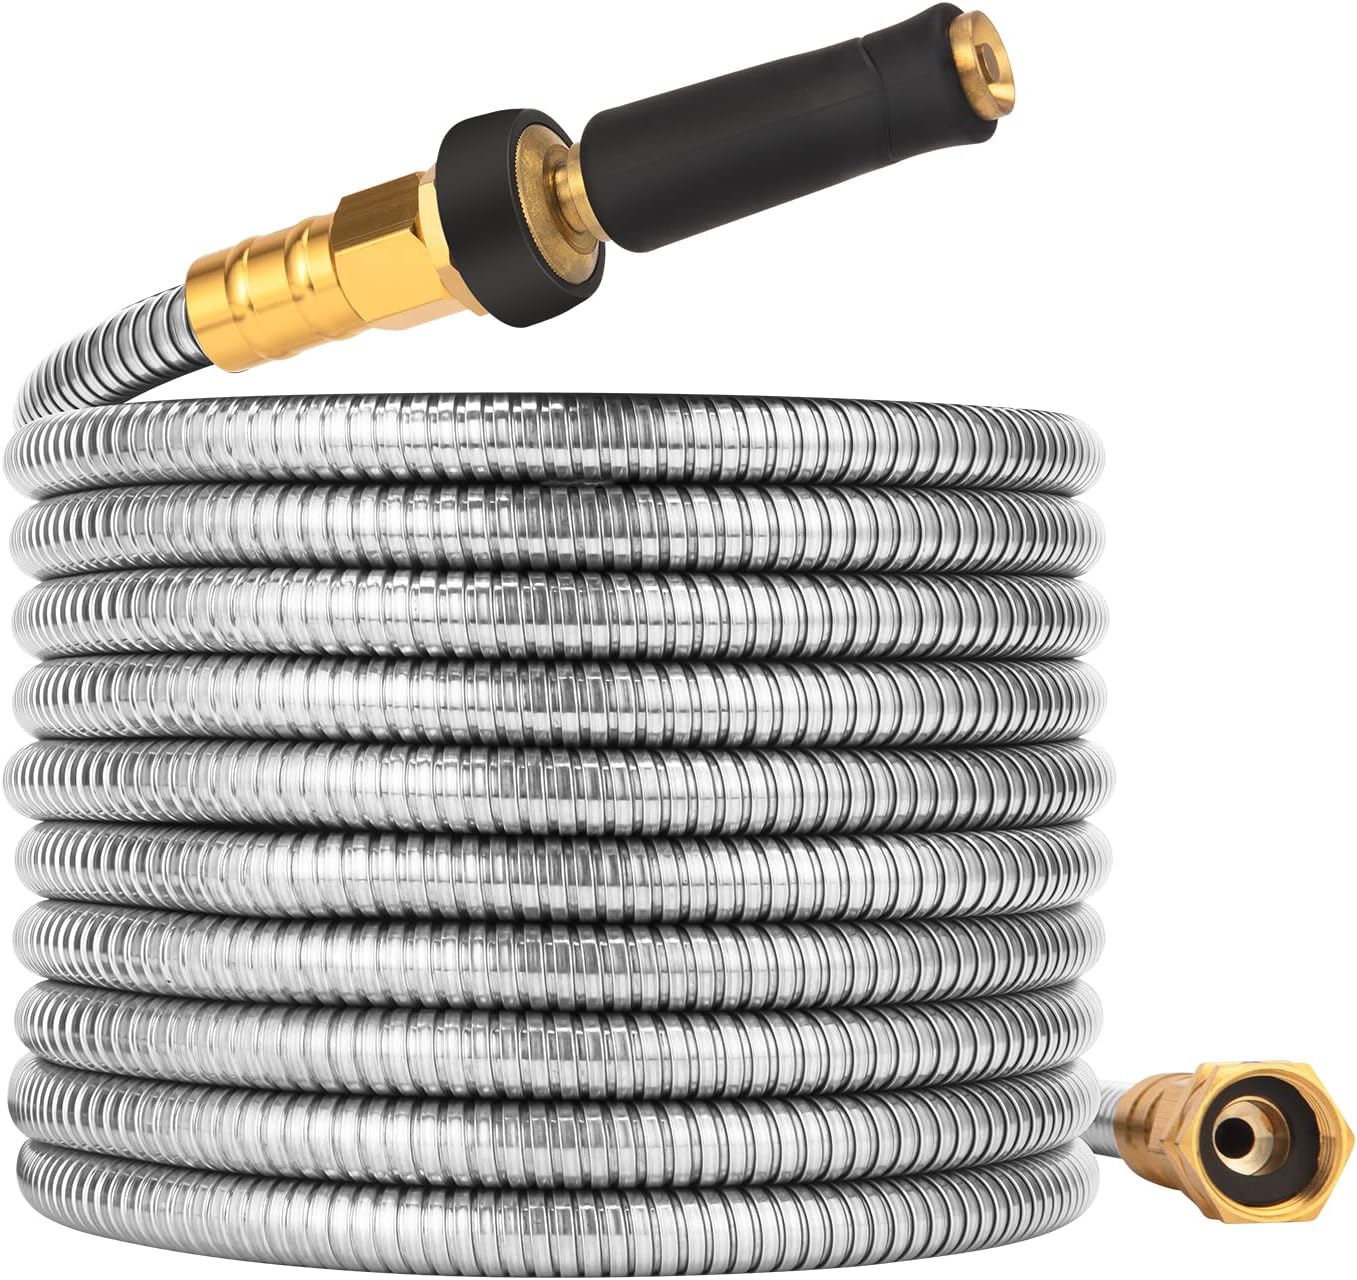 Rosy Earth Expandable Metal Garden Hose 50 FT - 304 [...]